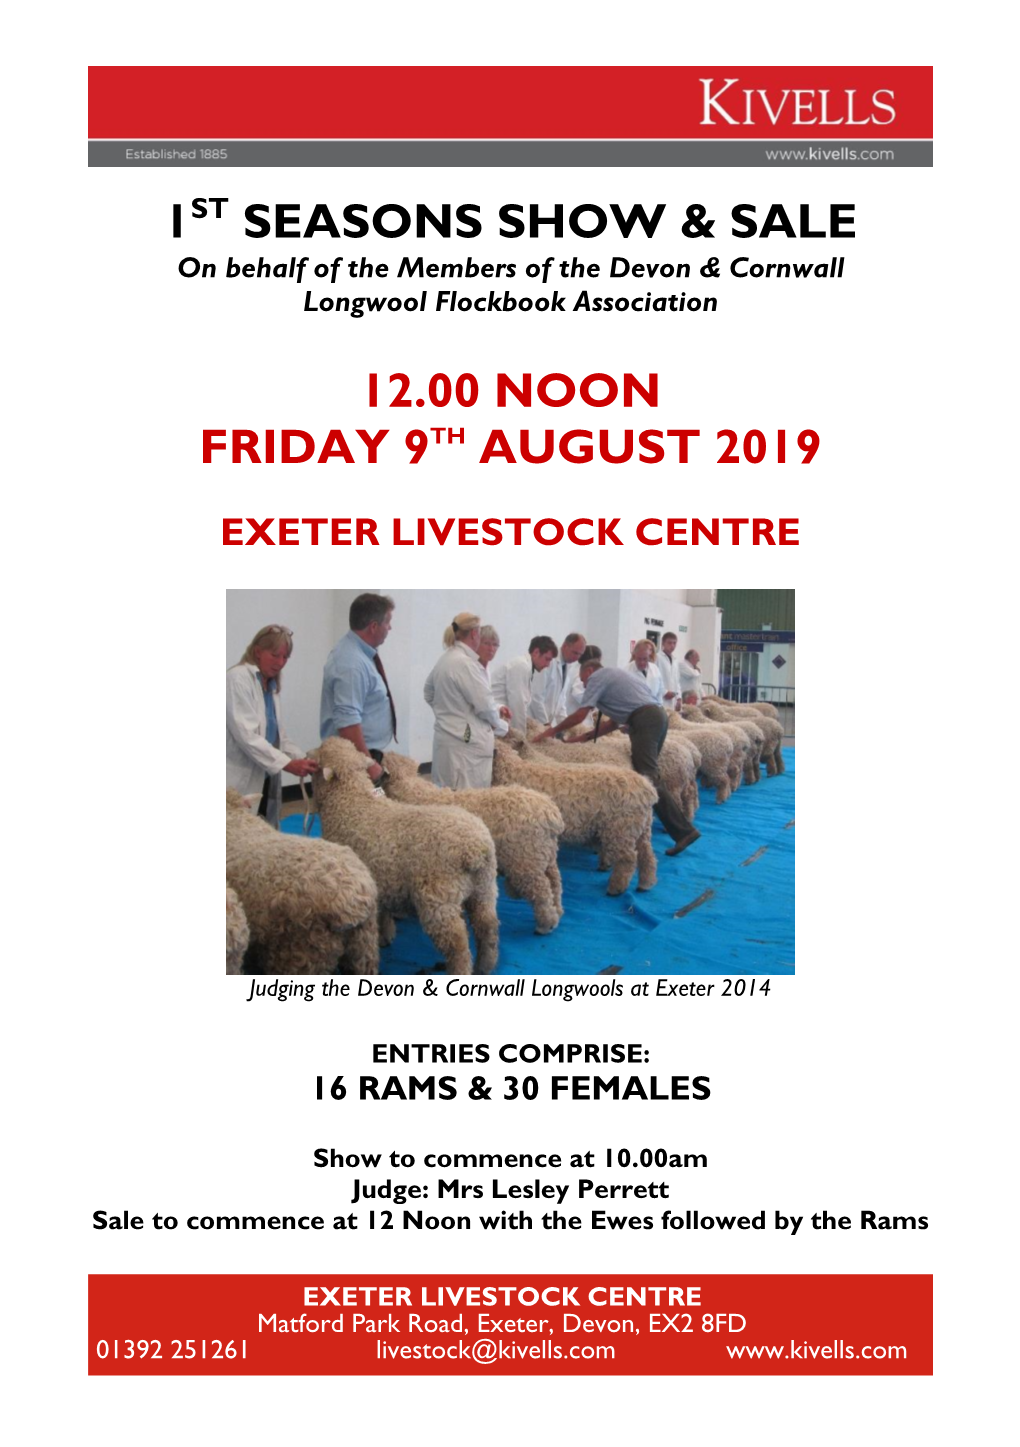 1St Seasons Show & Sale 12.00 Noon Friday 9Th August 2019